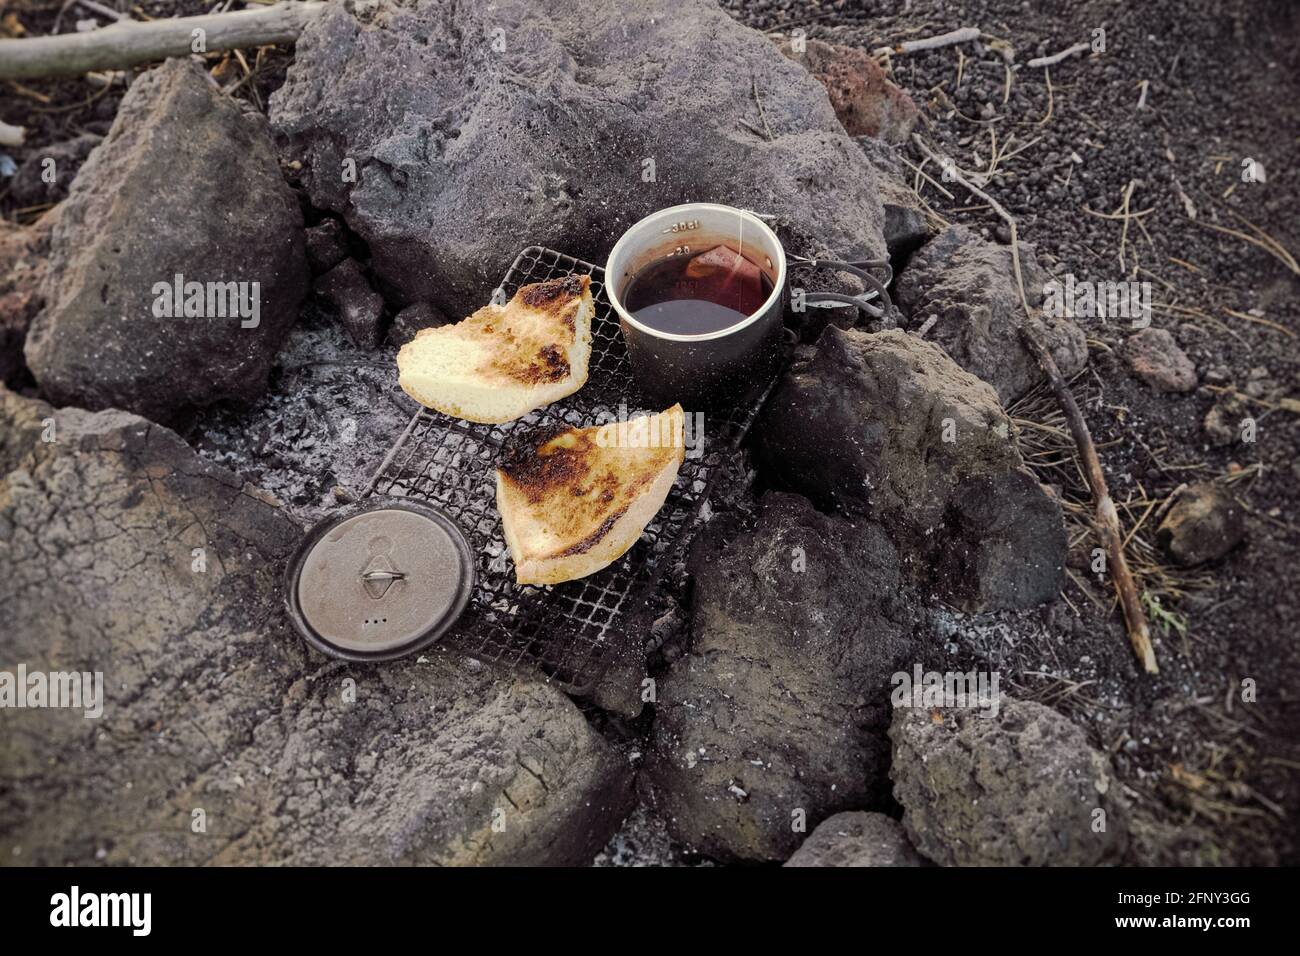 camp fire, food and cooking in recreational outdoor activity small grill with bread and mug of tea for the breakfast Stock Photo